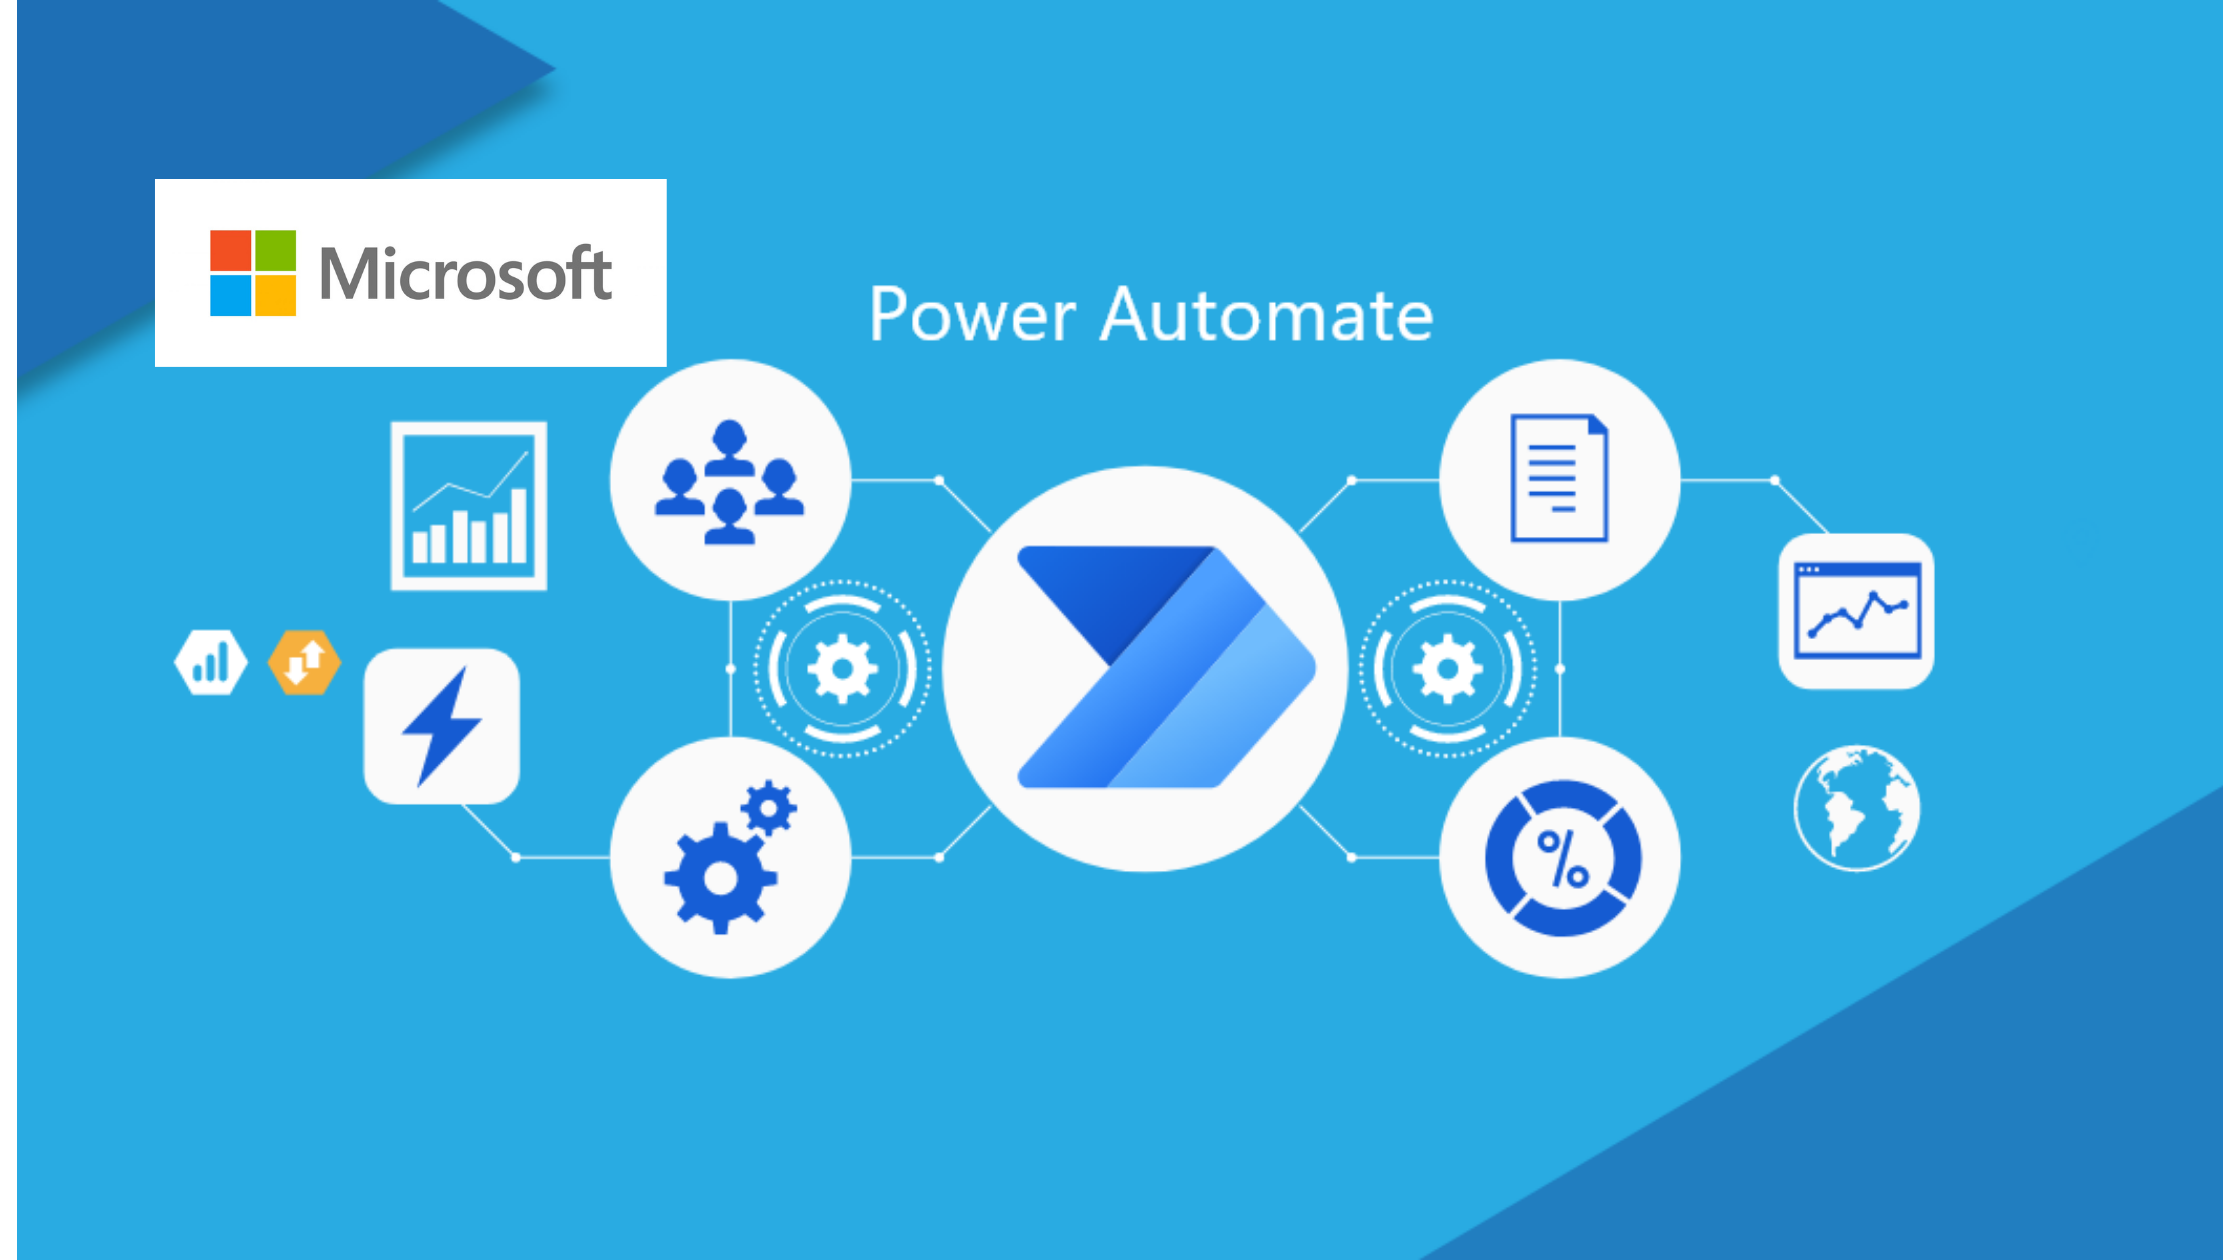 Workflow Automation Made Simple with Microsoft Power Automate